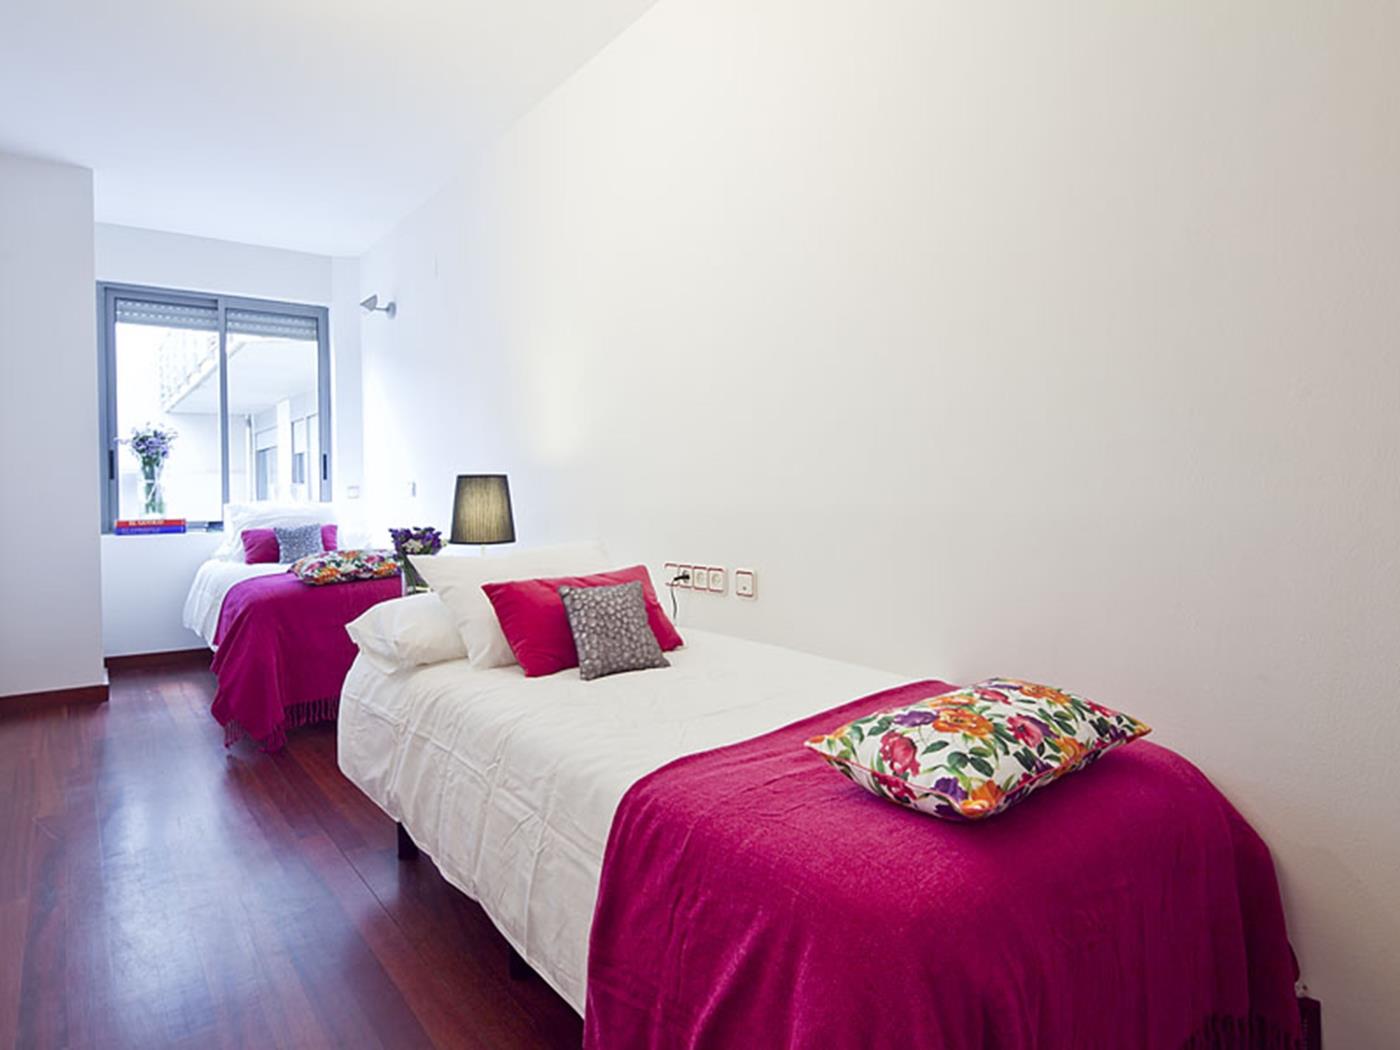 Rental accommodation for students in Barcelona with terrace and swimming pool - My Space Barcelona Apartments